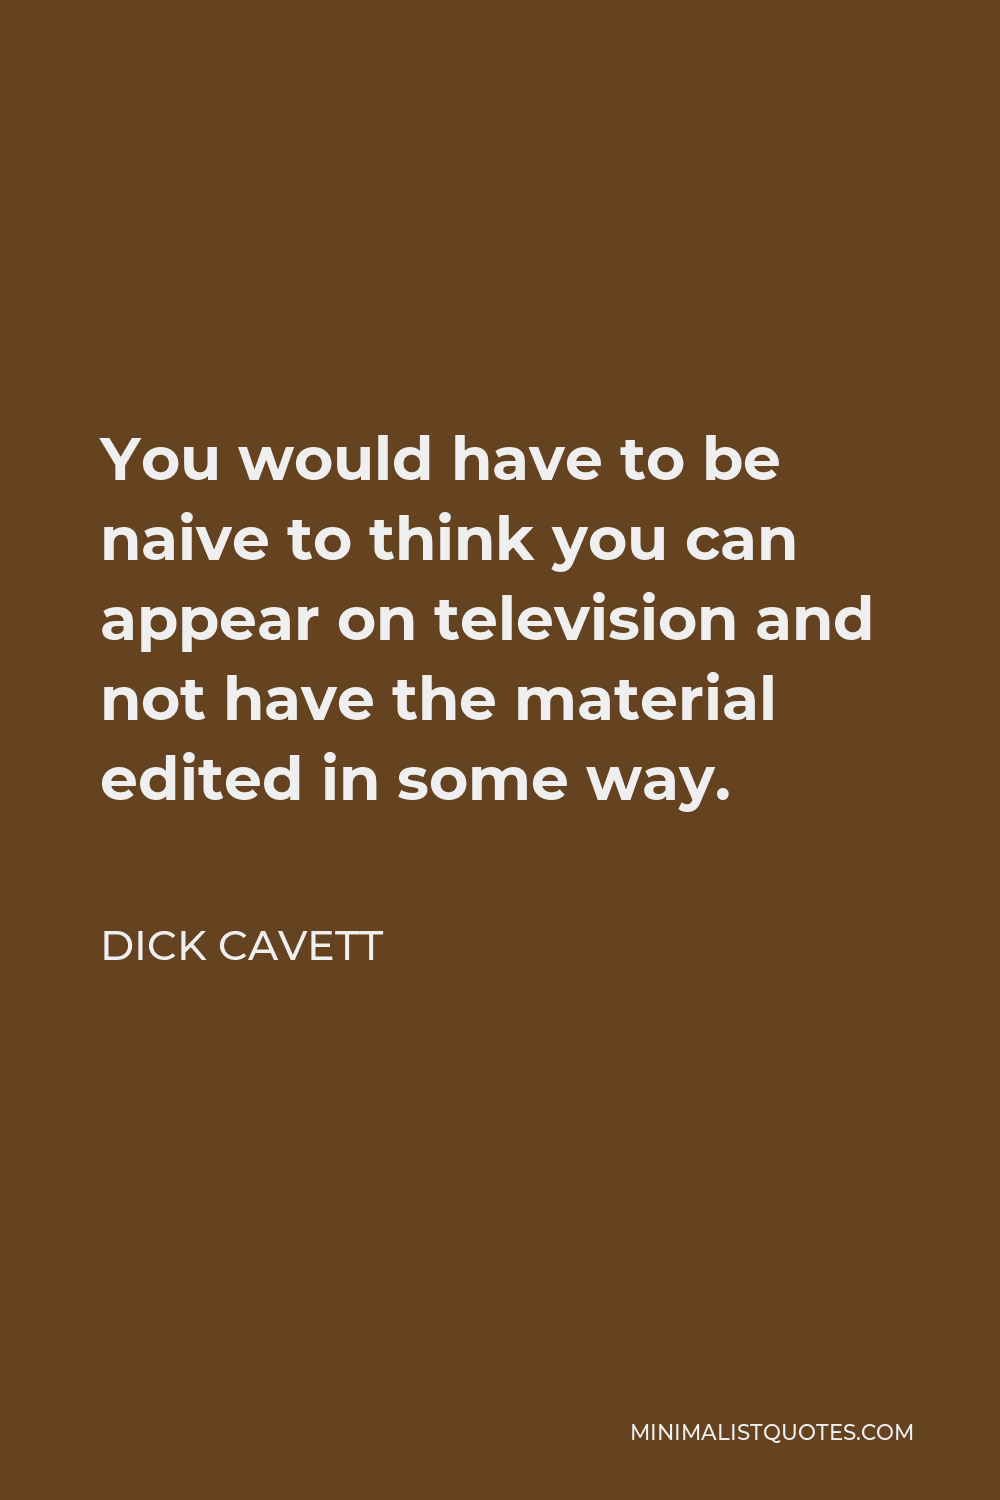 Dick Cavett Quote - You would have to be naive to think you can appear on television and not have the material edited in some way.